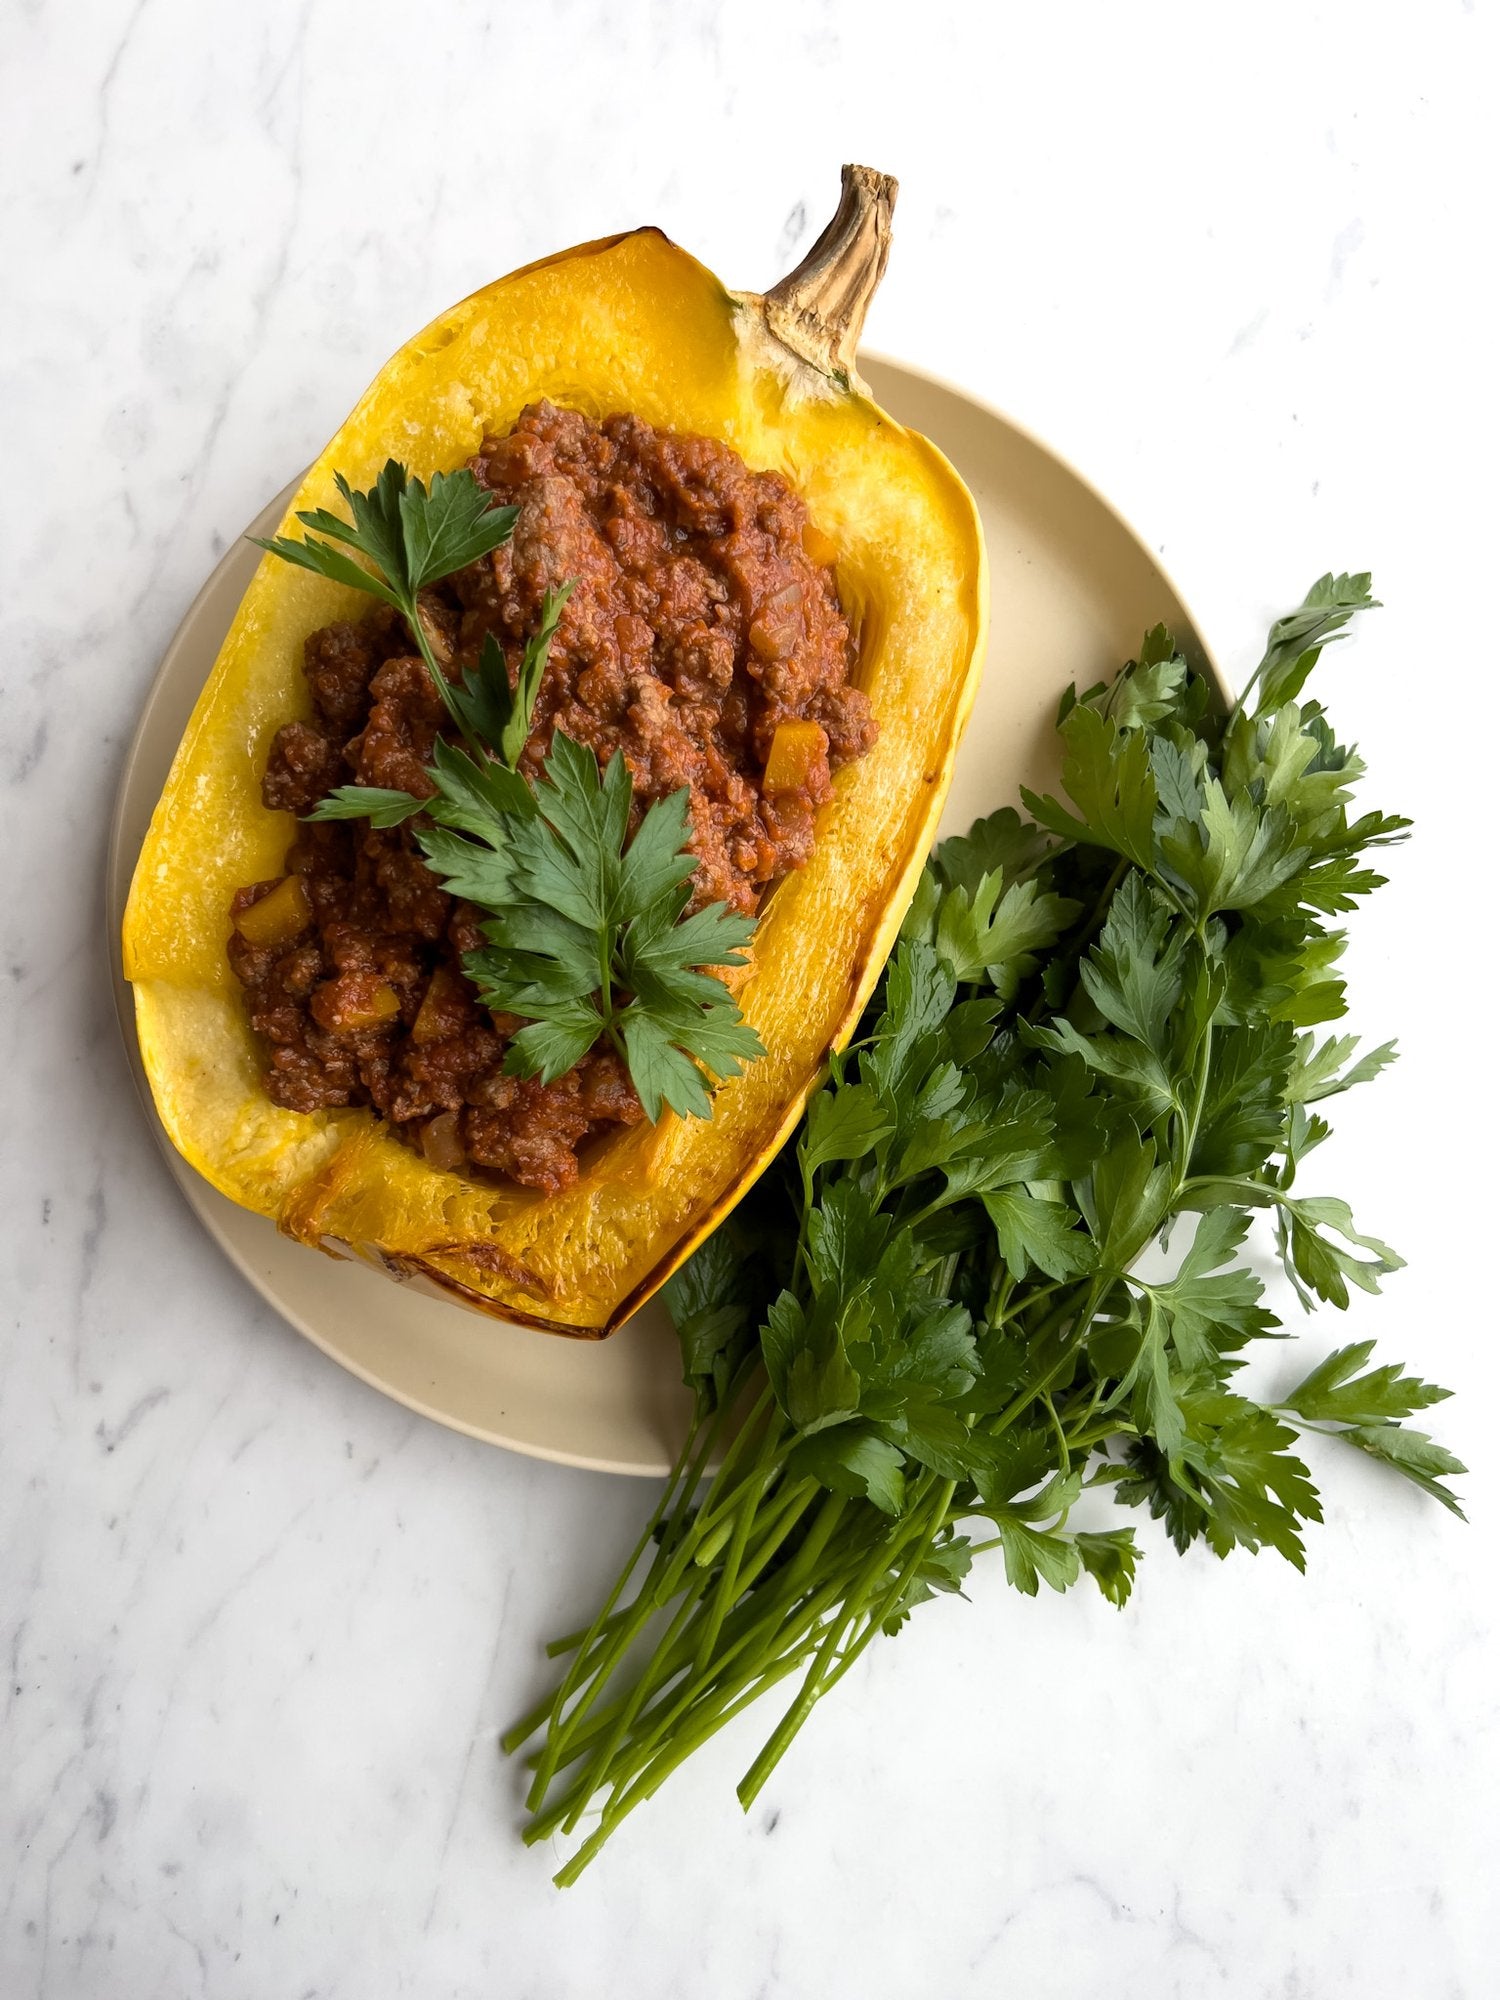 Baked Spaghetti Squash Boat with Bolognese